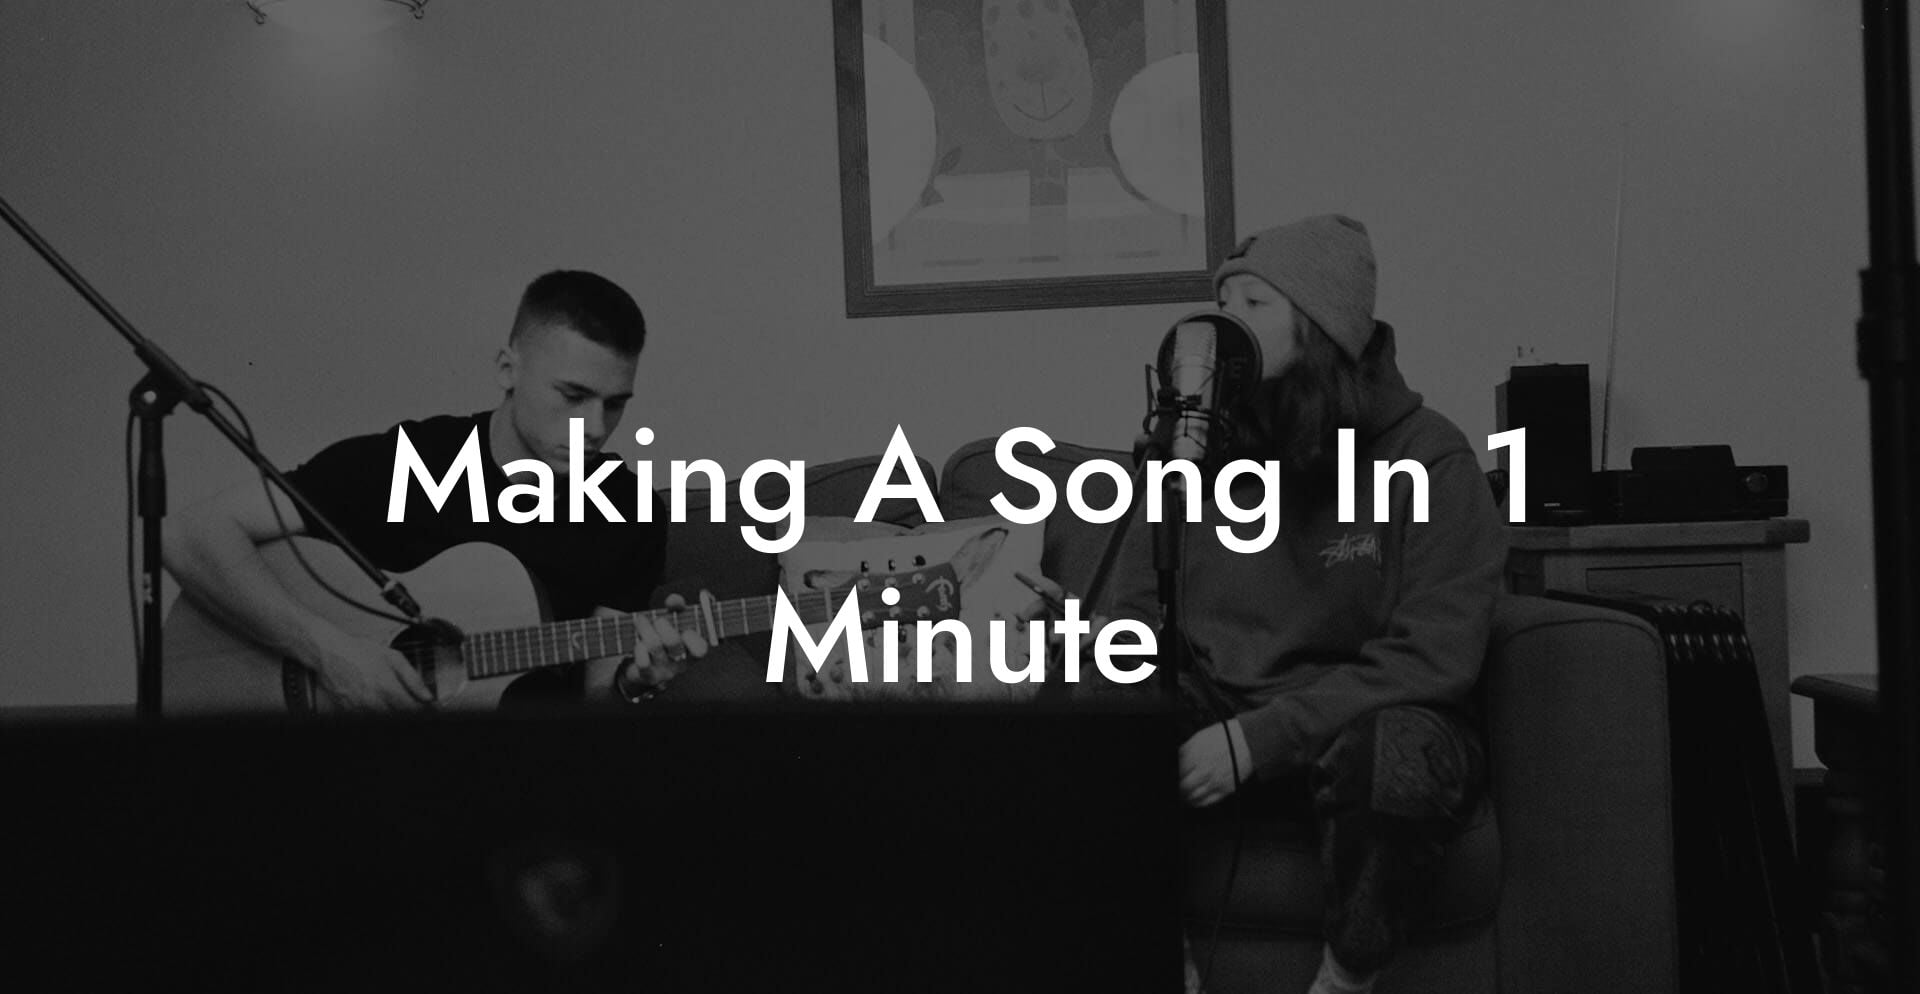 making a song in 1 minute lyric assistant